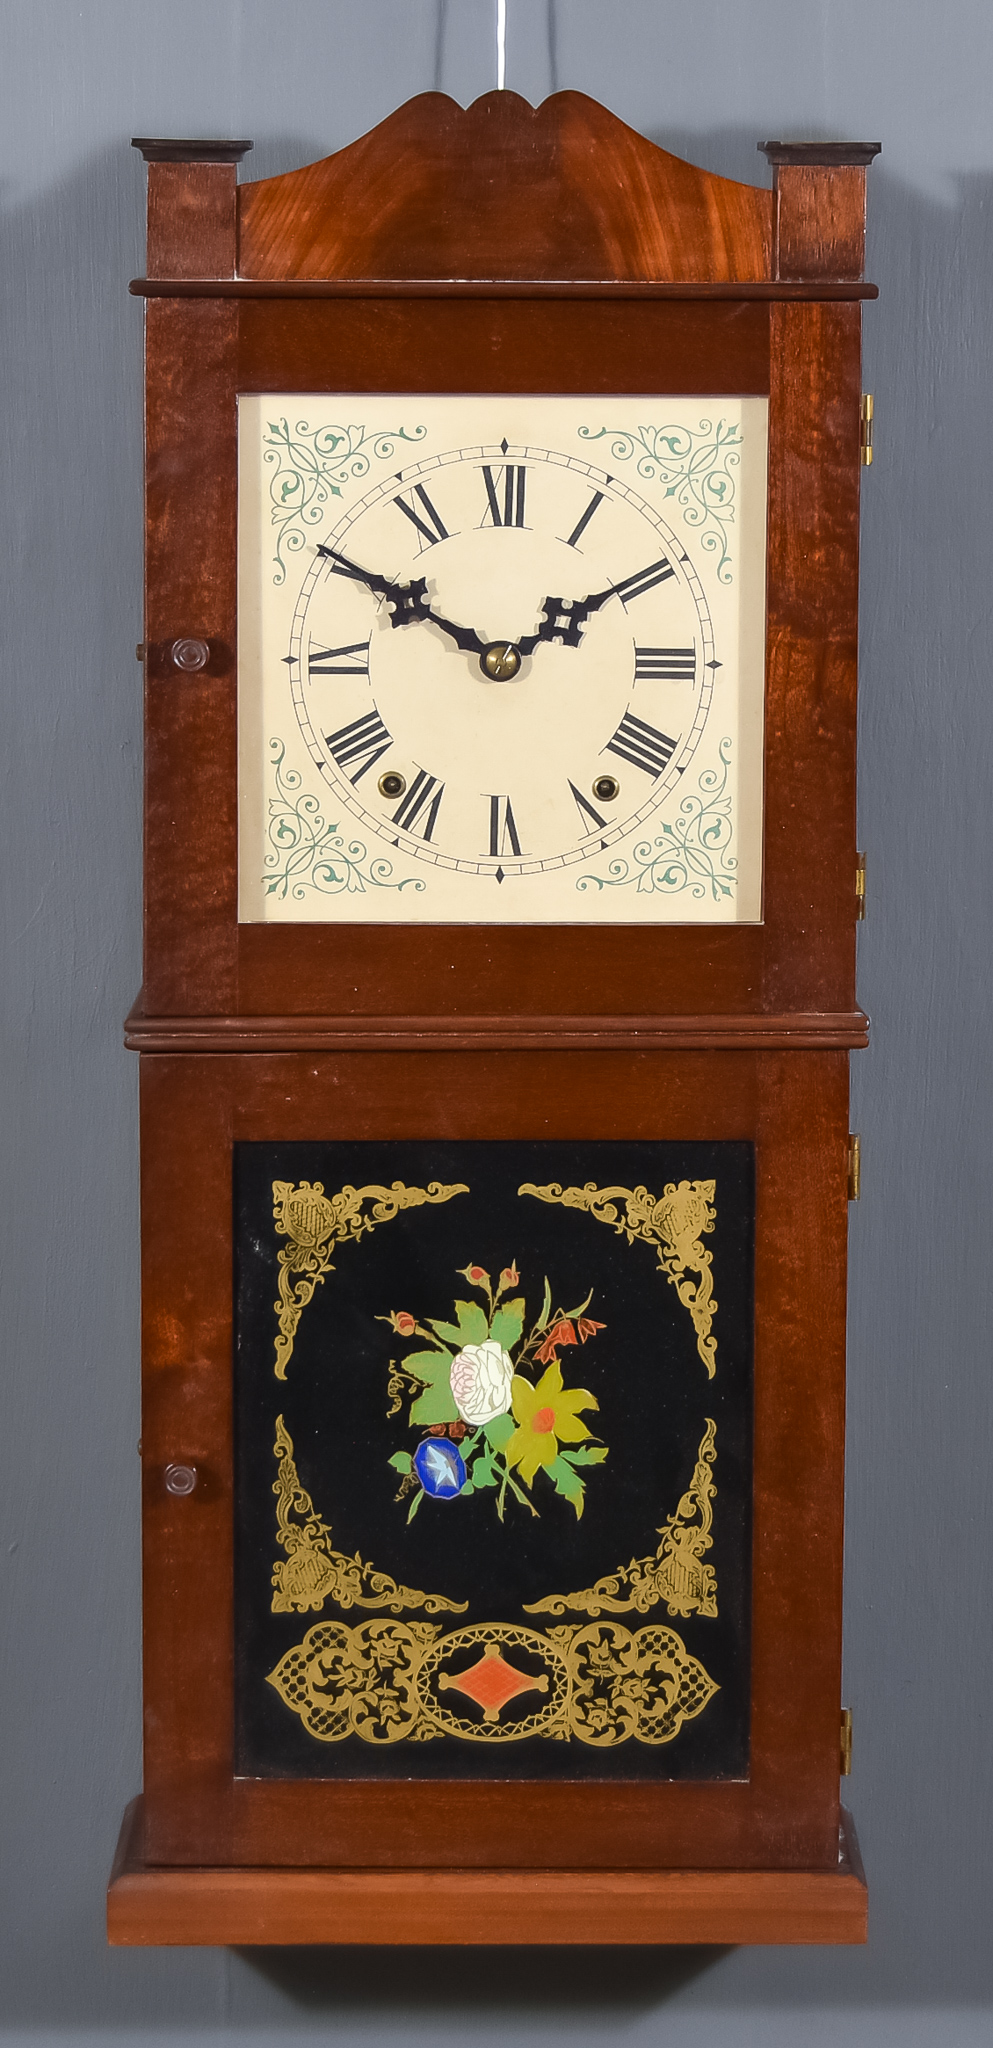 Three Mahogany Cased Wall Clocks of 19th Century American Design, all by Leslie Brundle, all with